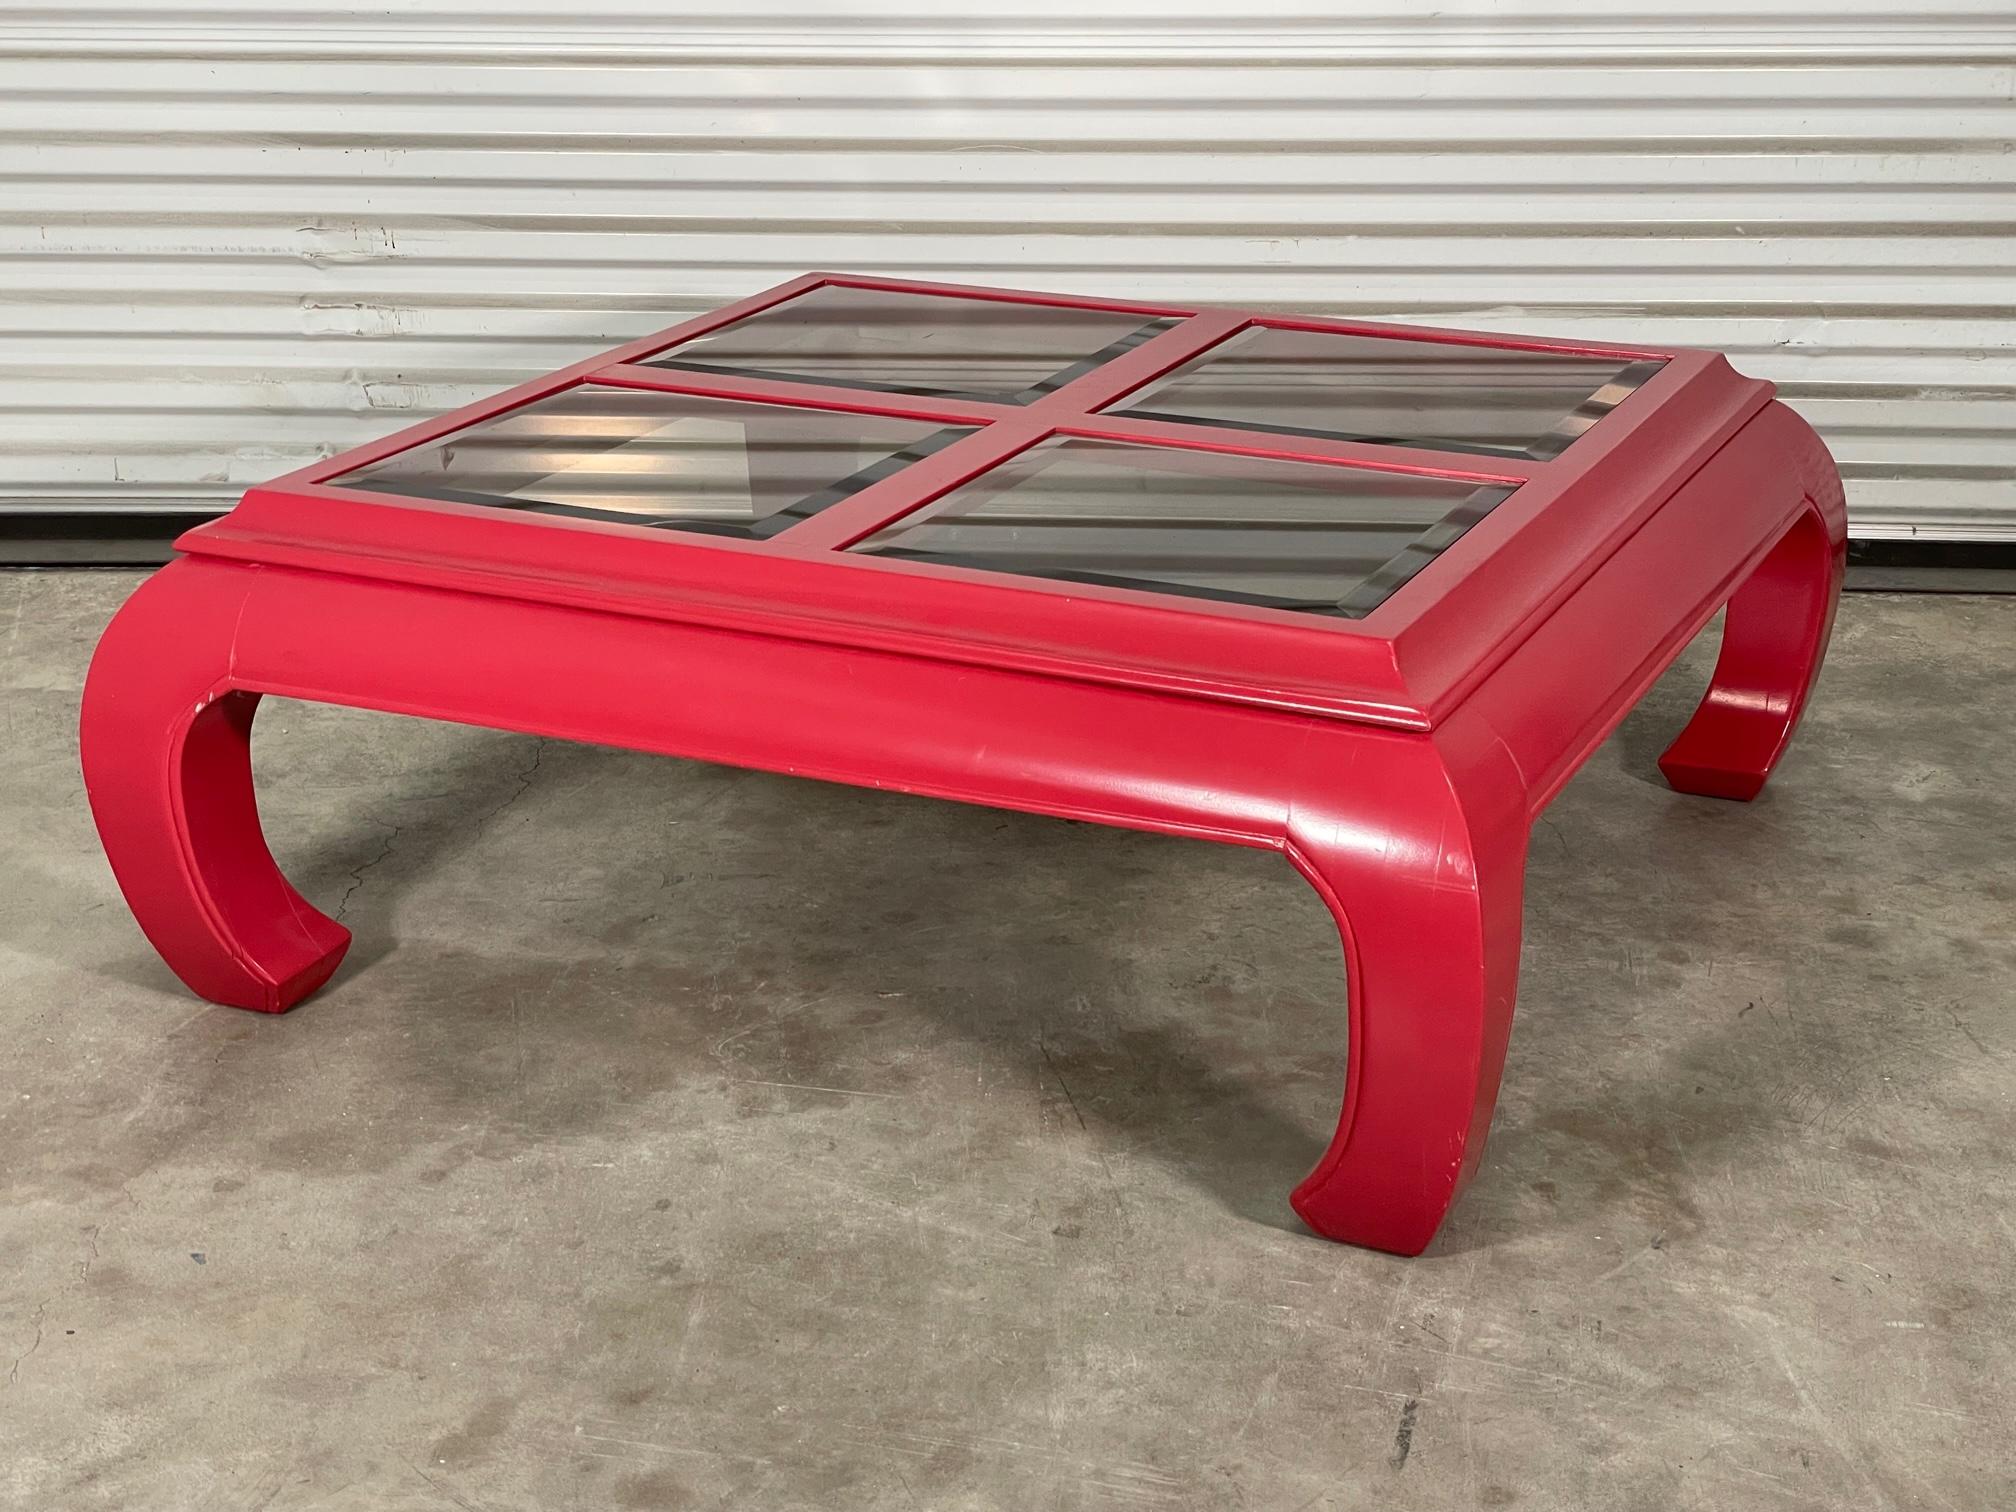 Ming Asian style coffee table features smoked beveled glass inserts and red high gloss lacquer finish. Good condition with minor imperfections to the newly lacquered finish. May exhibit scuffs, marks, or wear, see photos for details.
Shipping to